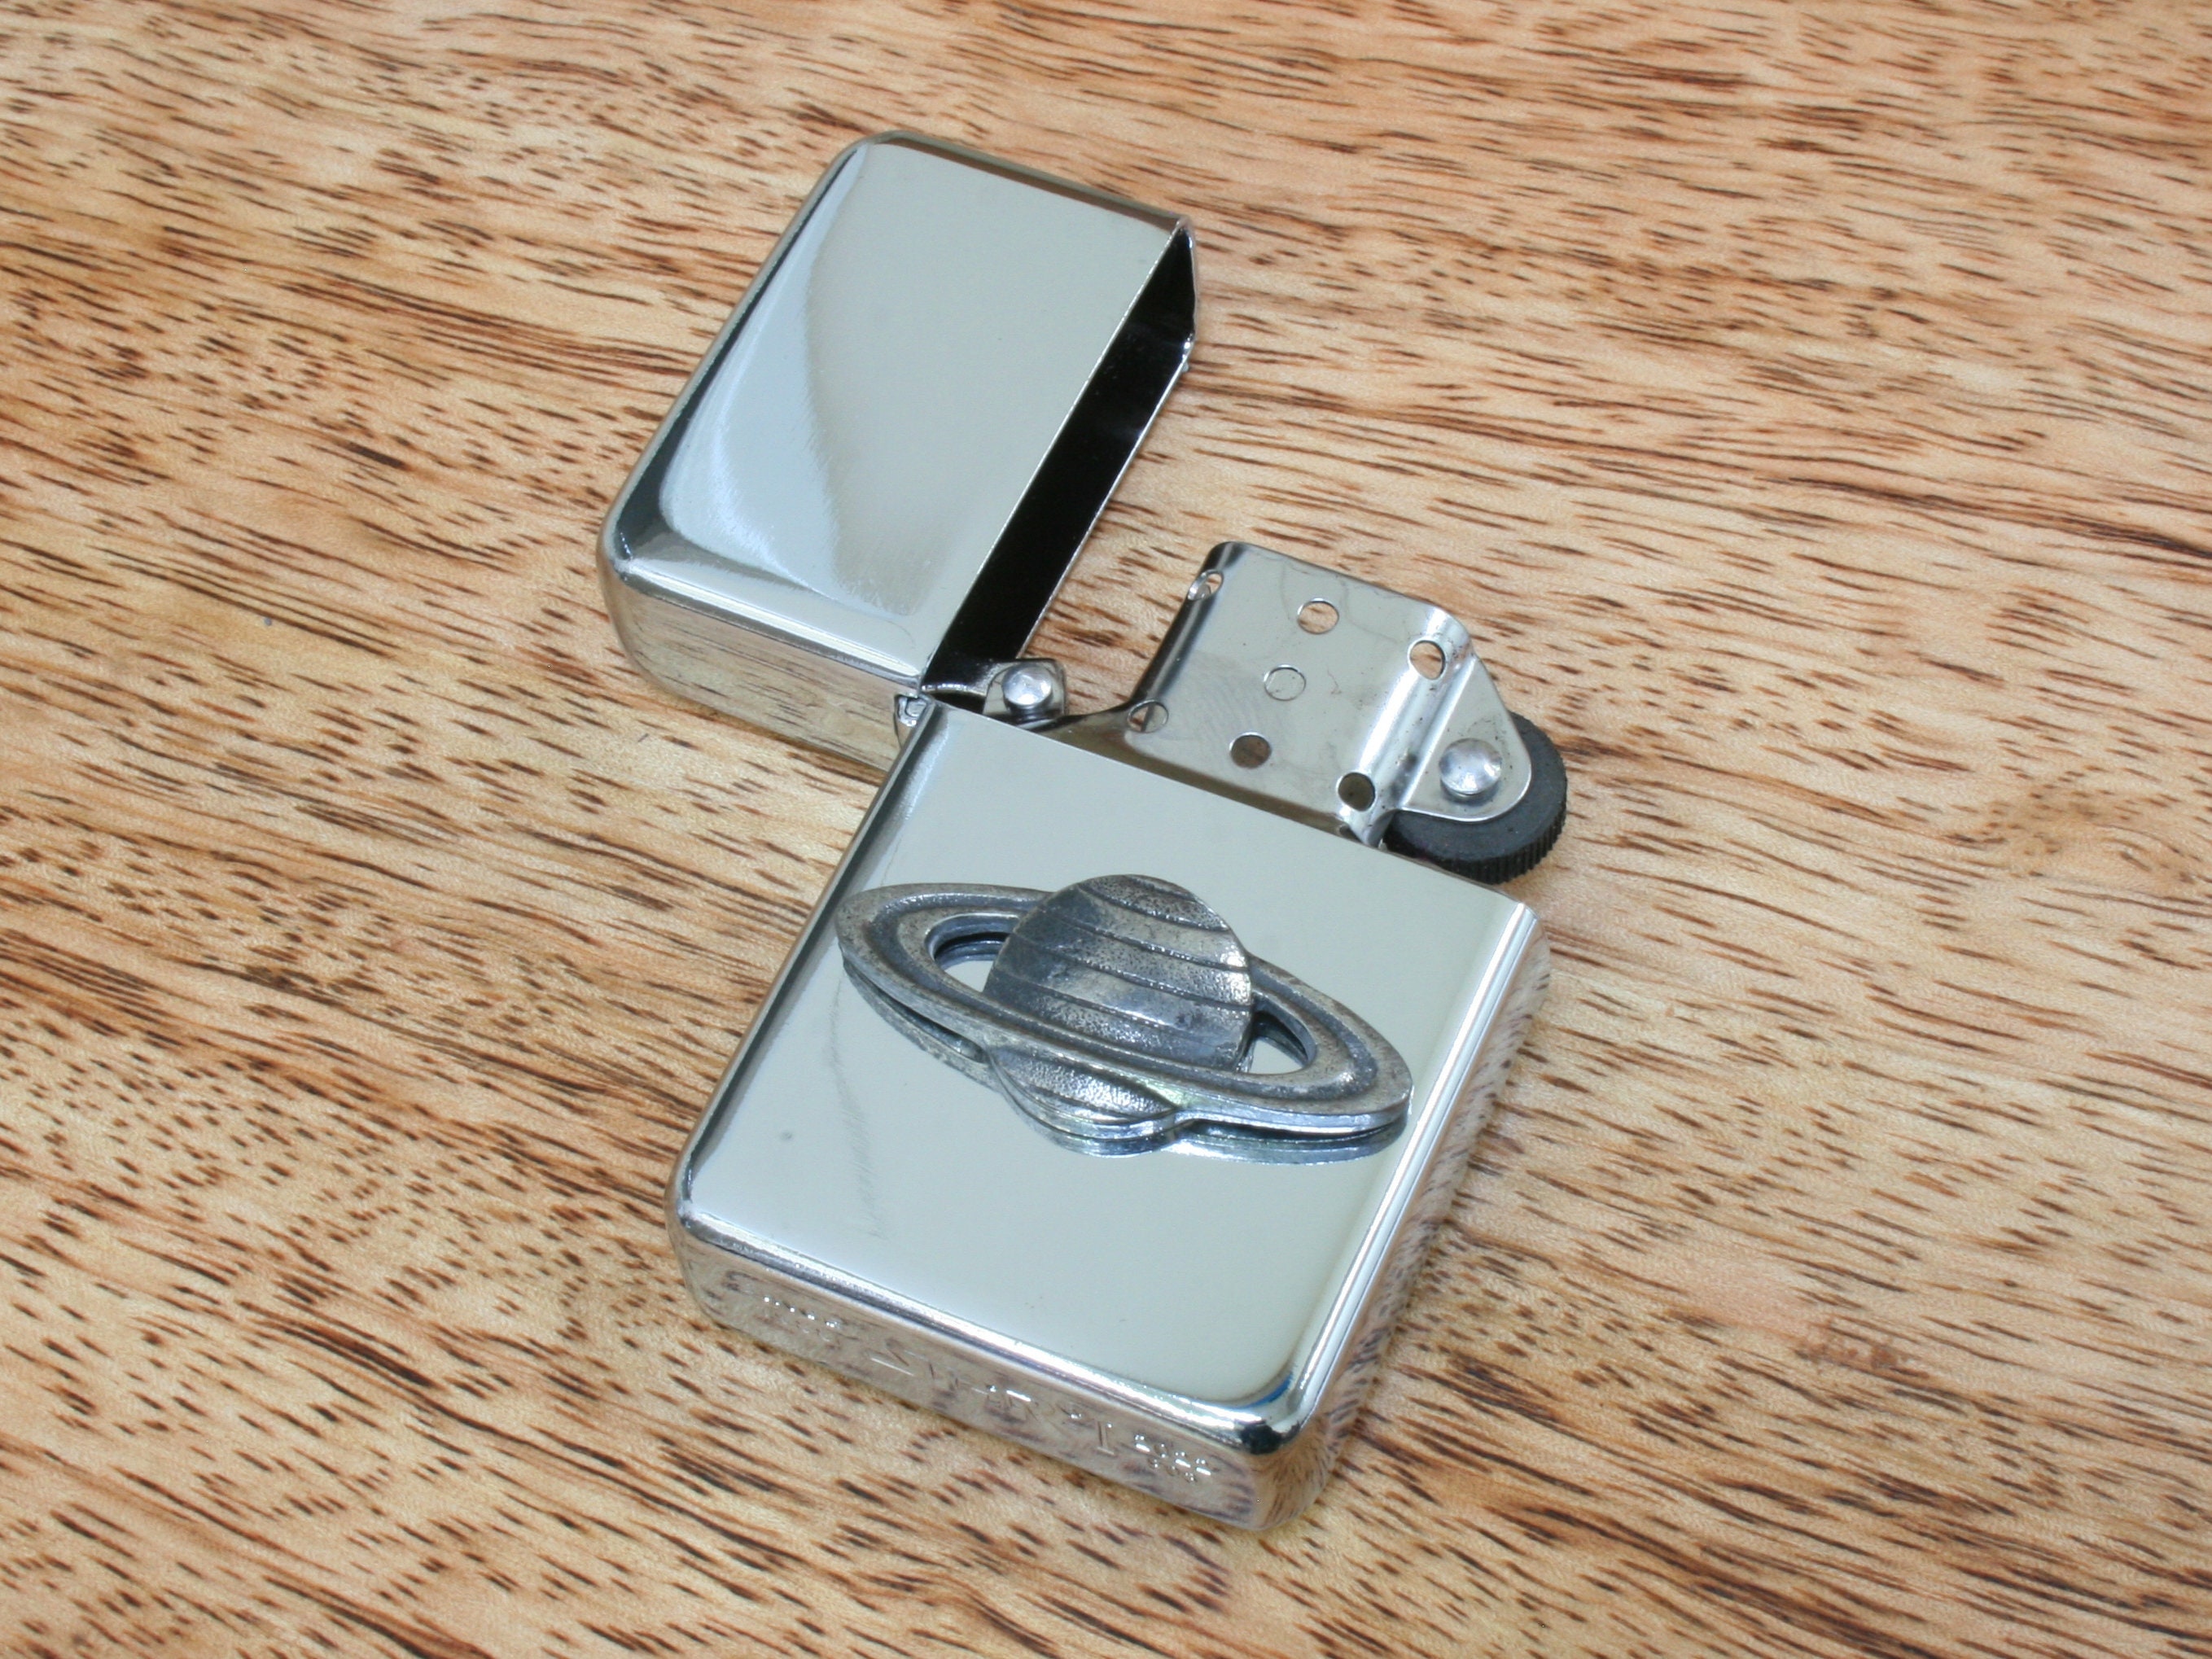 ❦ on X: vivienne westwood heart shaped lighters for valentine